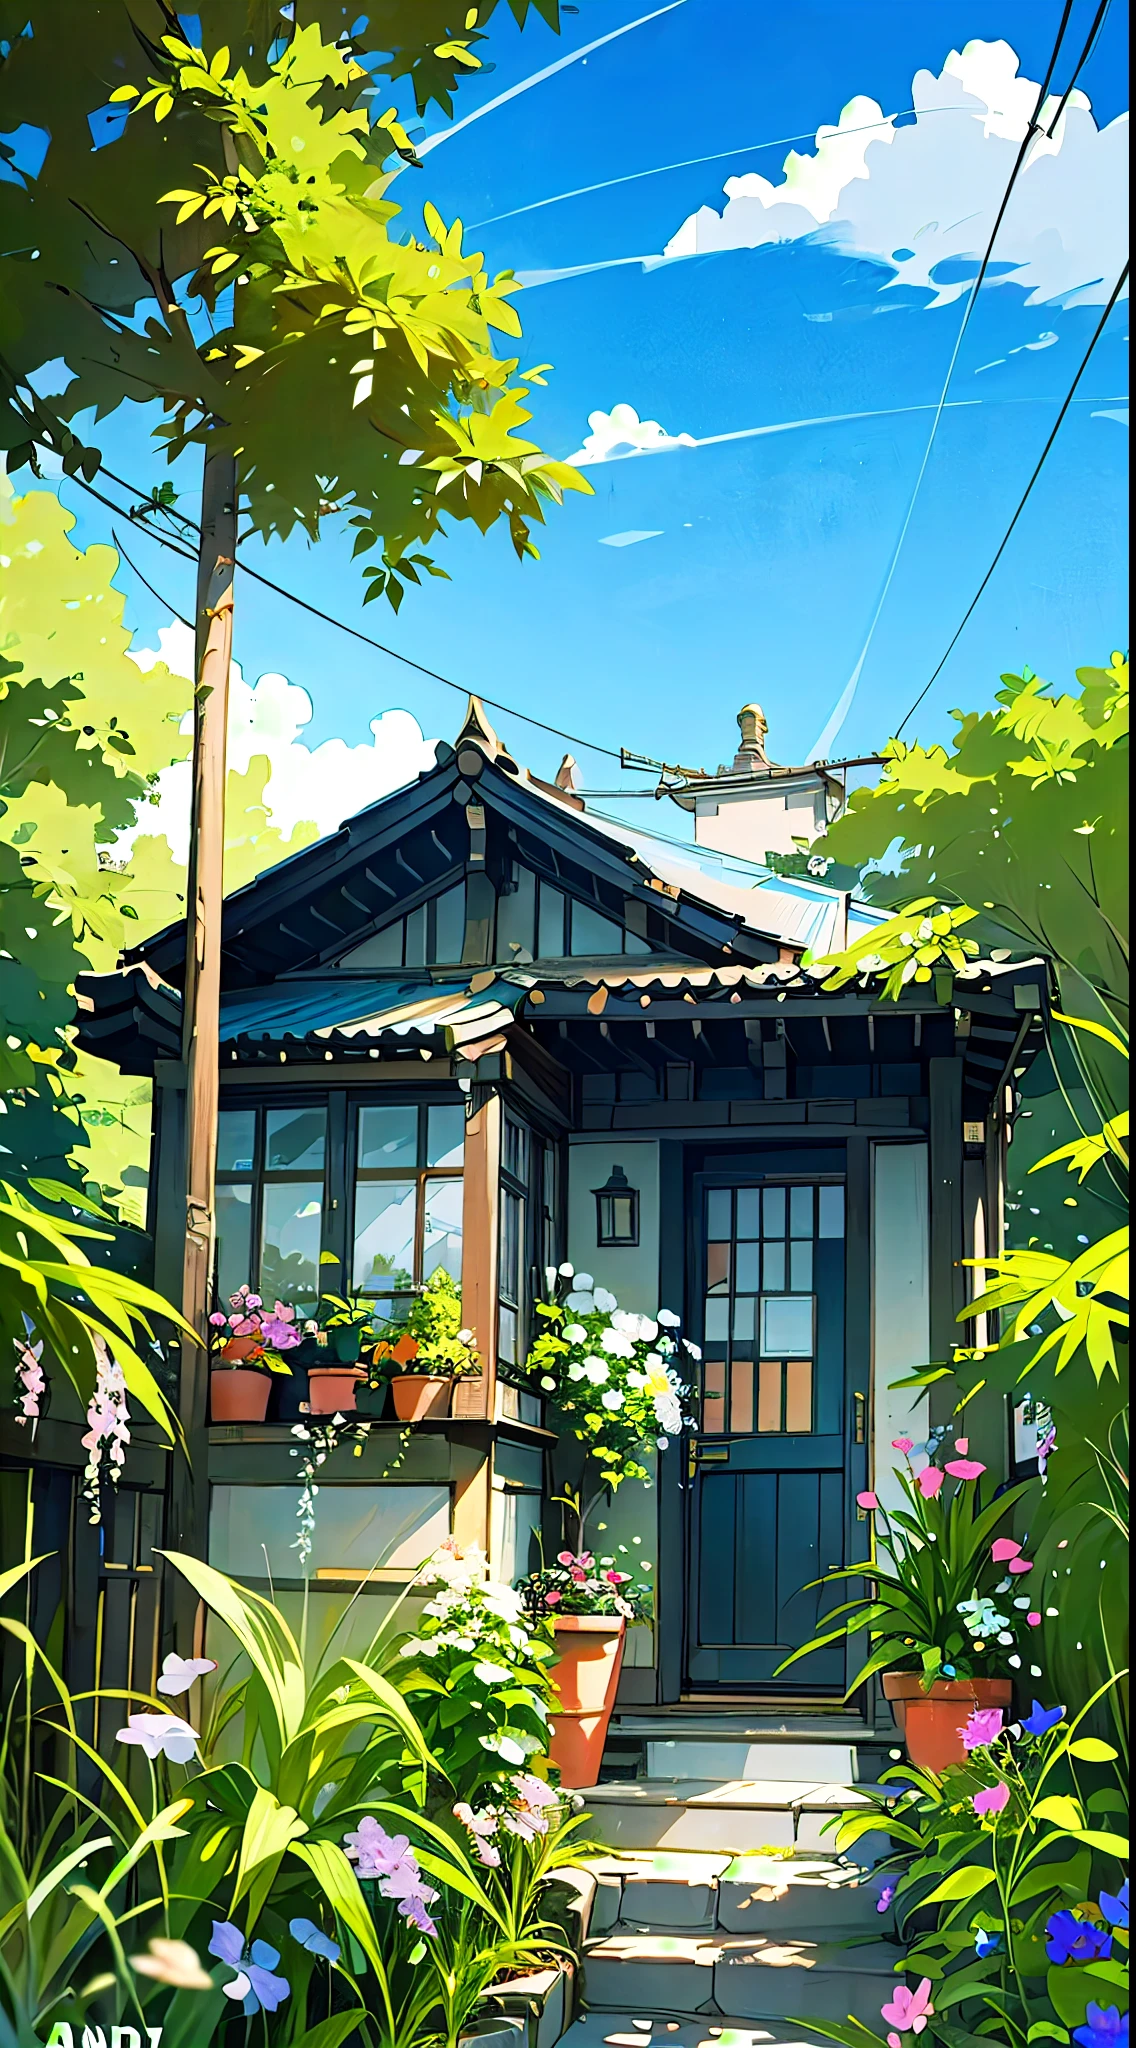 a painting of a house surrounded by plants, anime scenery, anime nature, cozy home background, beautiful anime art, beautiful anime artwork, anime nature wallpap, detailed anime art, detailed digital anime art, scenery art detailed, studio ghibli environment, by Edward Okuń, anime landscape, detailed anime artwork, beautiful anime art style, house background, clean anime art, saturated, hanging flowers, wisteria, potted plants in the balcony, gaden